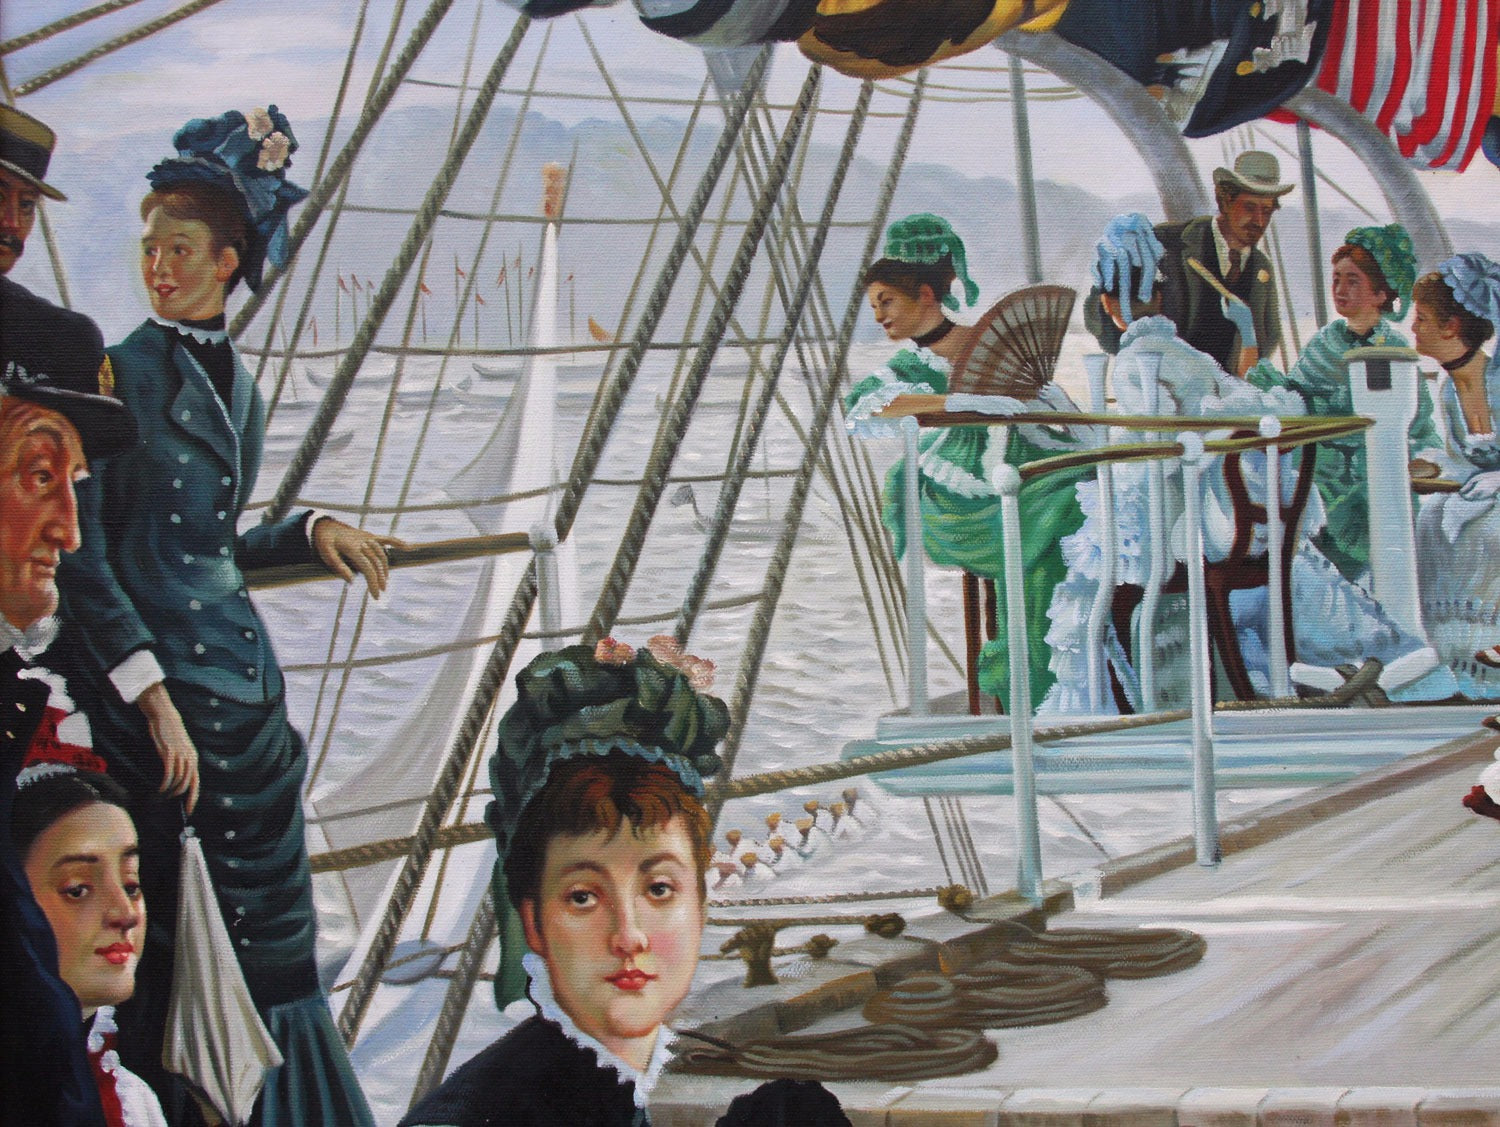 Oil Painting after 'The Ball On Shipboard' in style of James Tissot